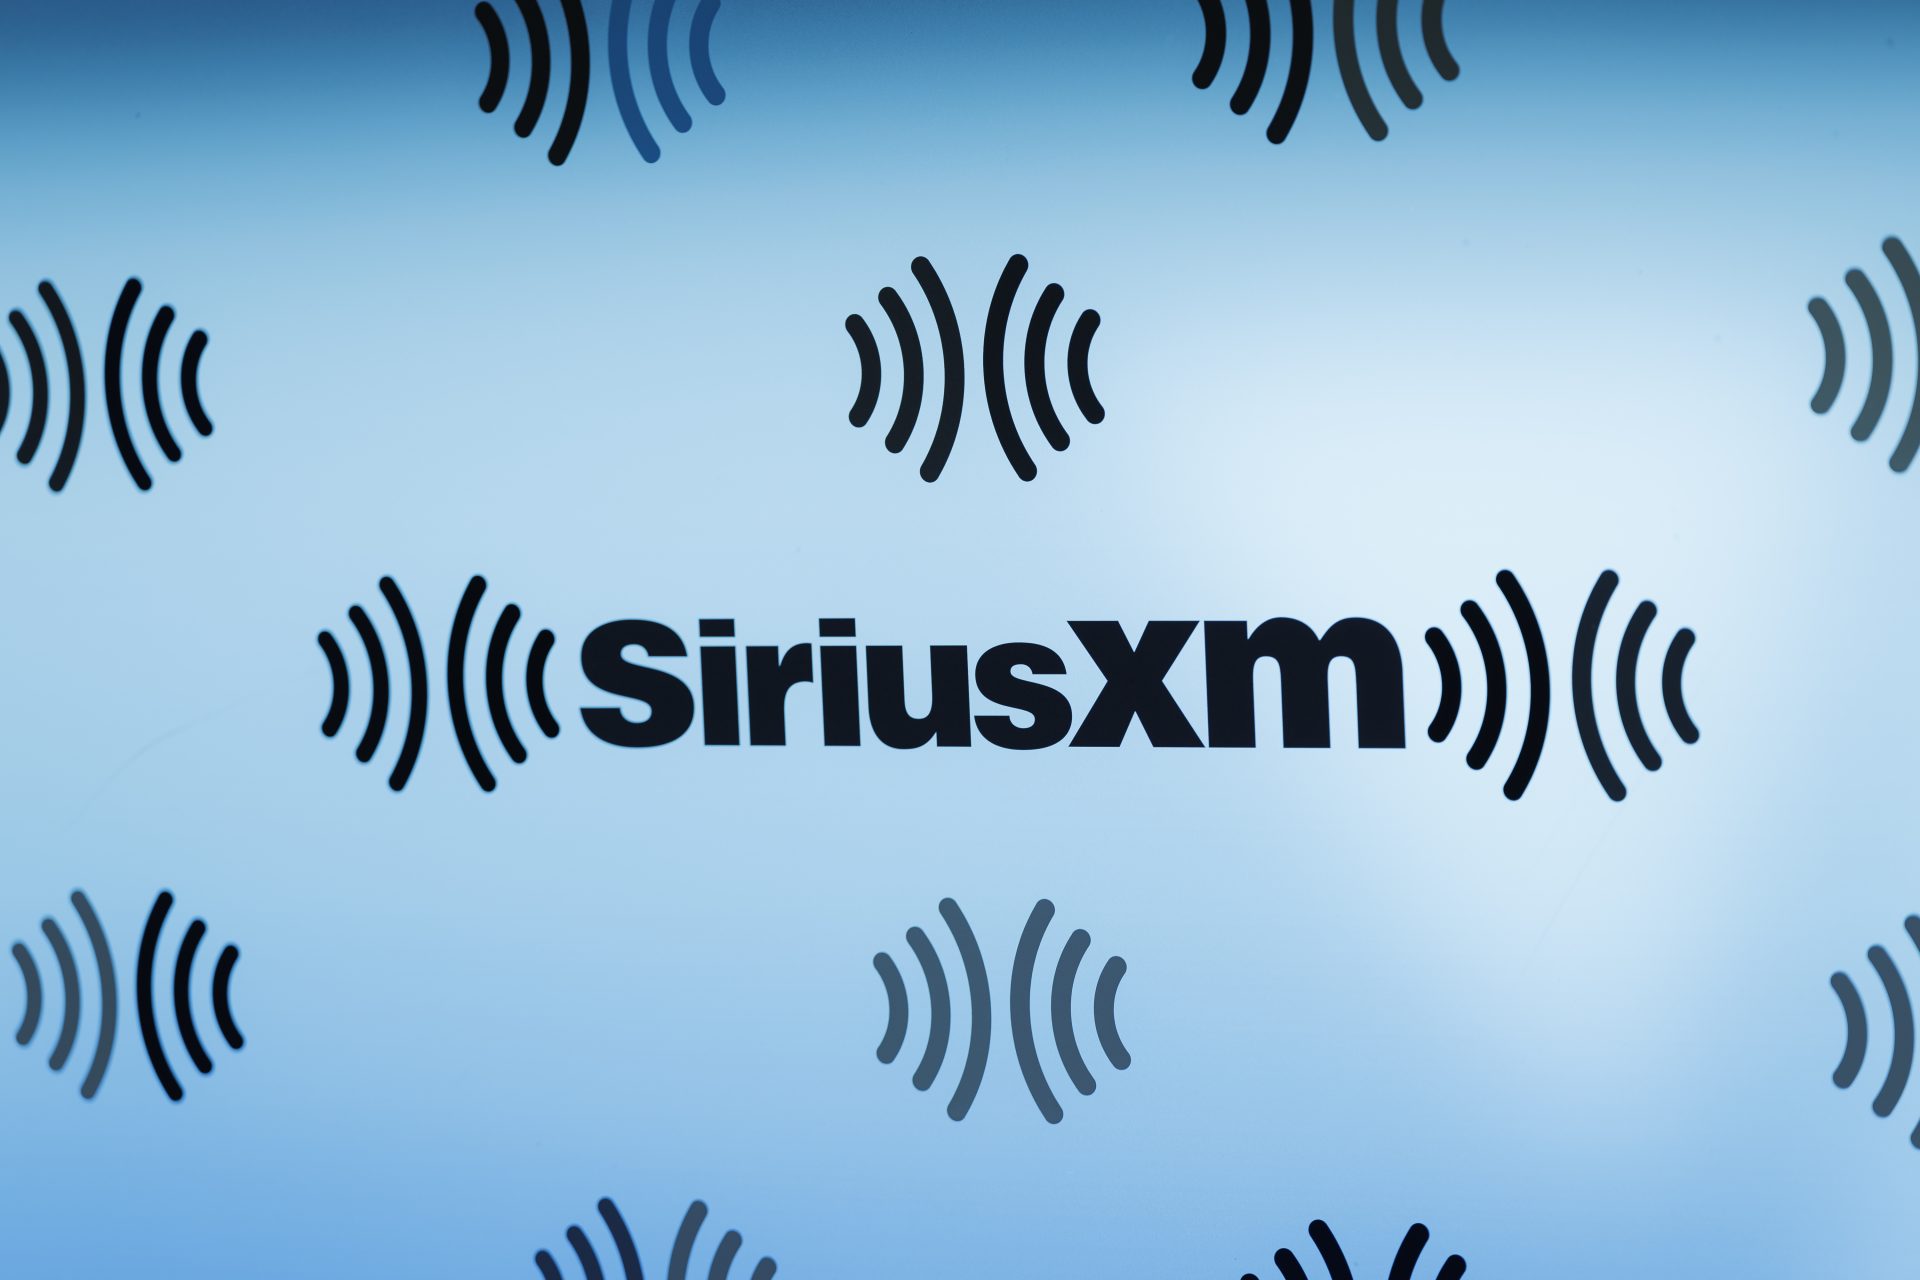 New York Sues SiriusXM Cancel Subscriptions Lawsuit scaled